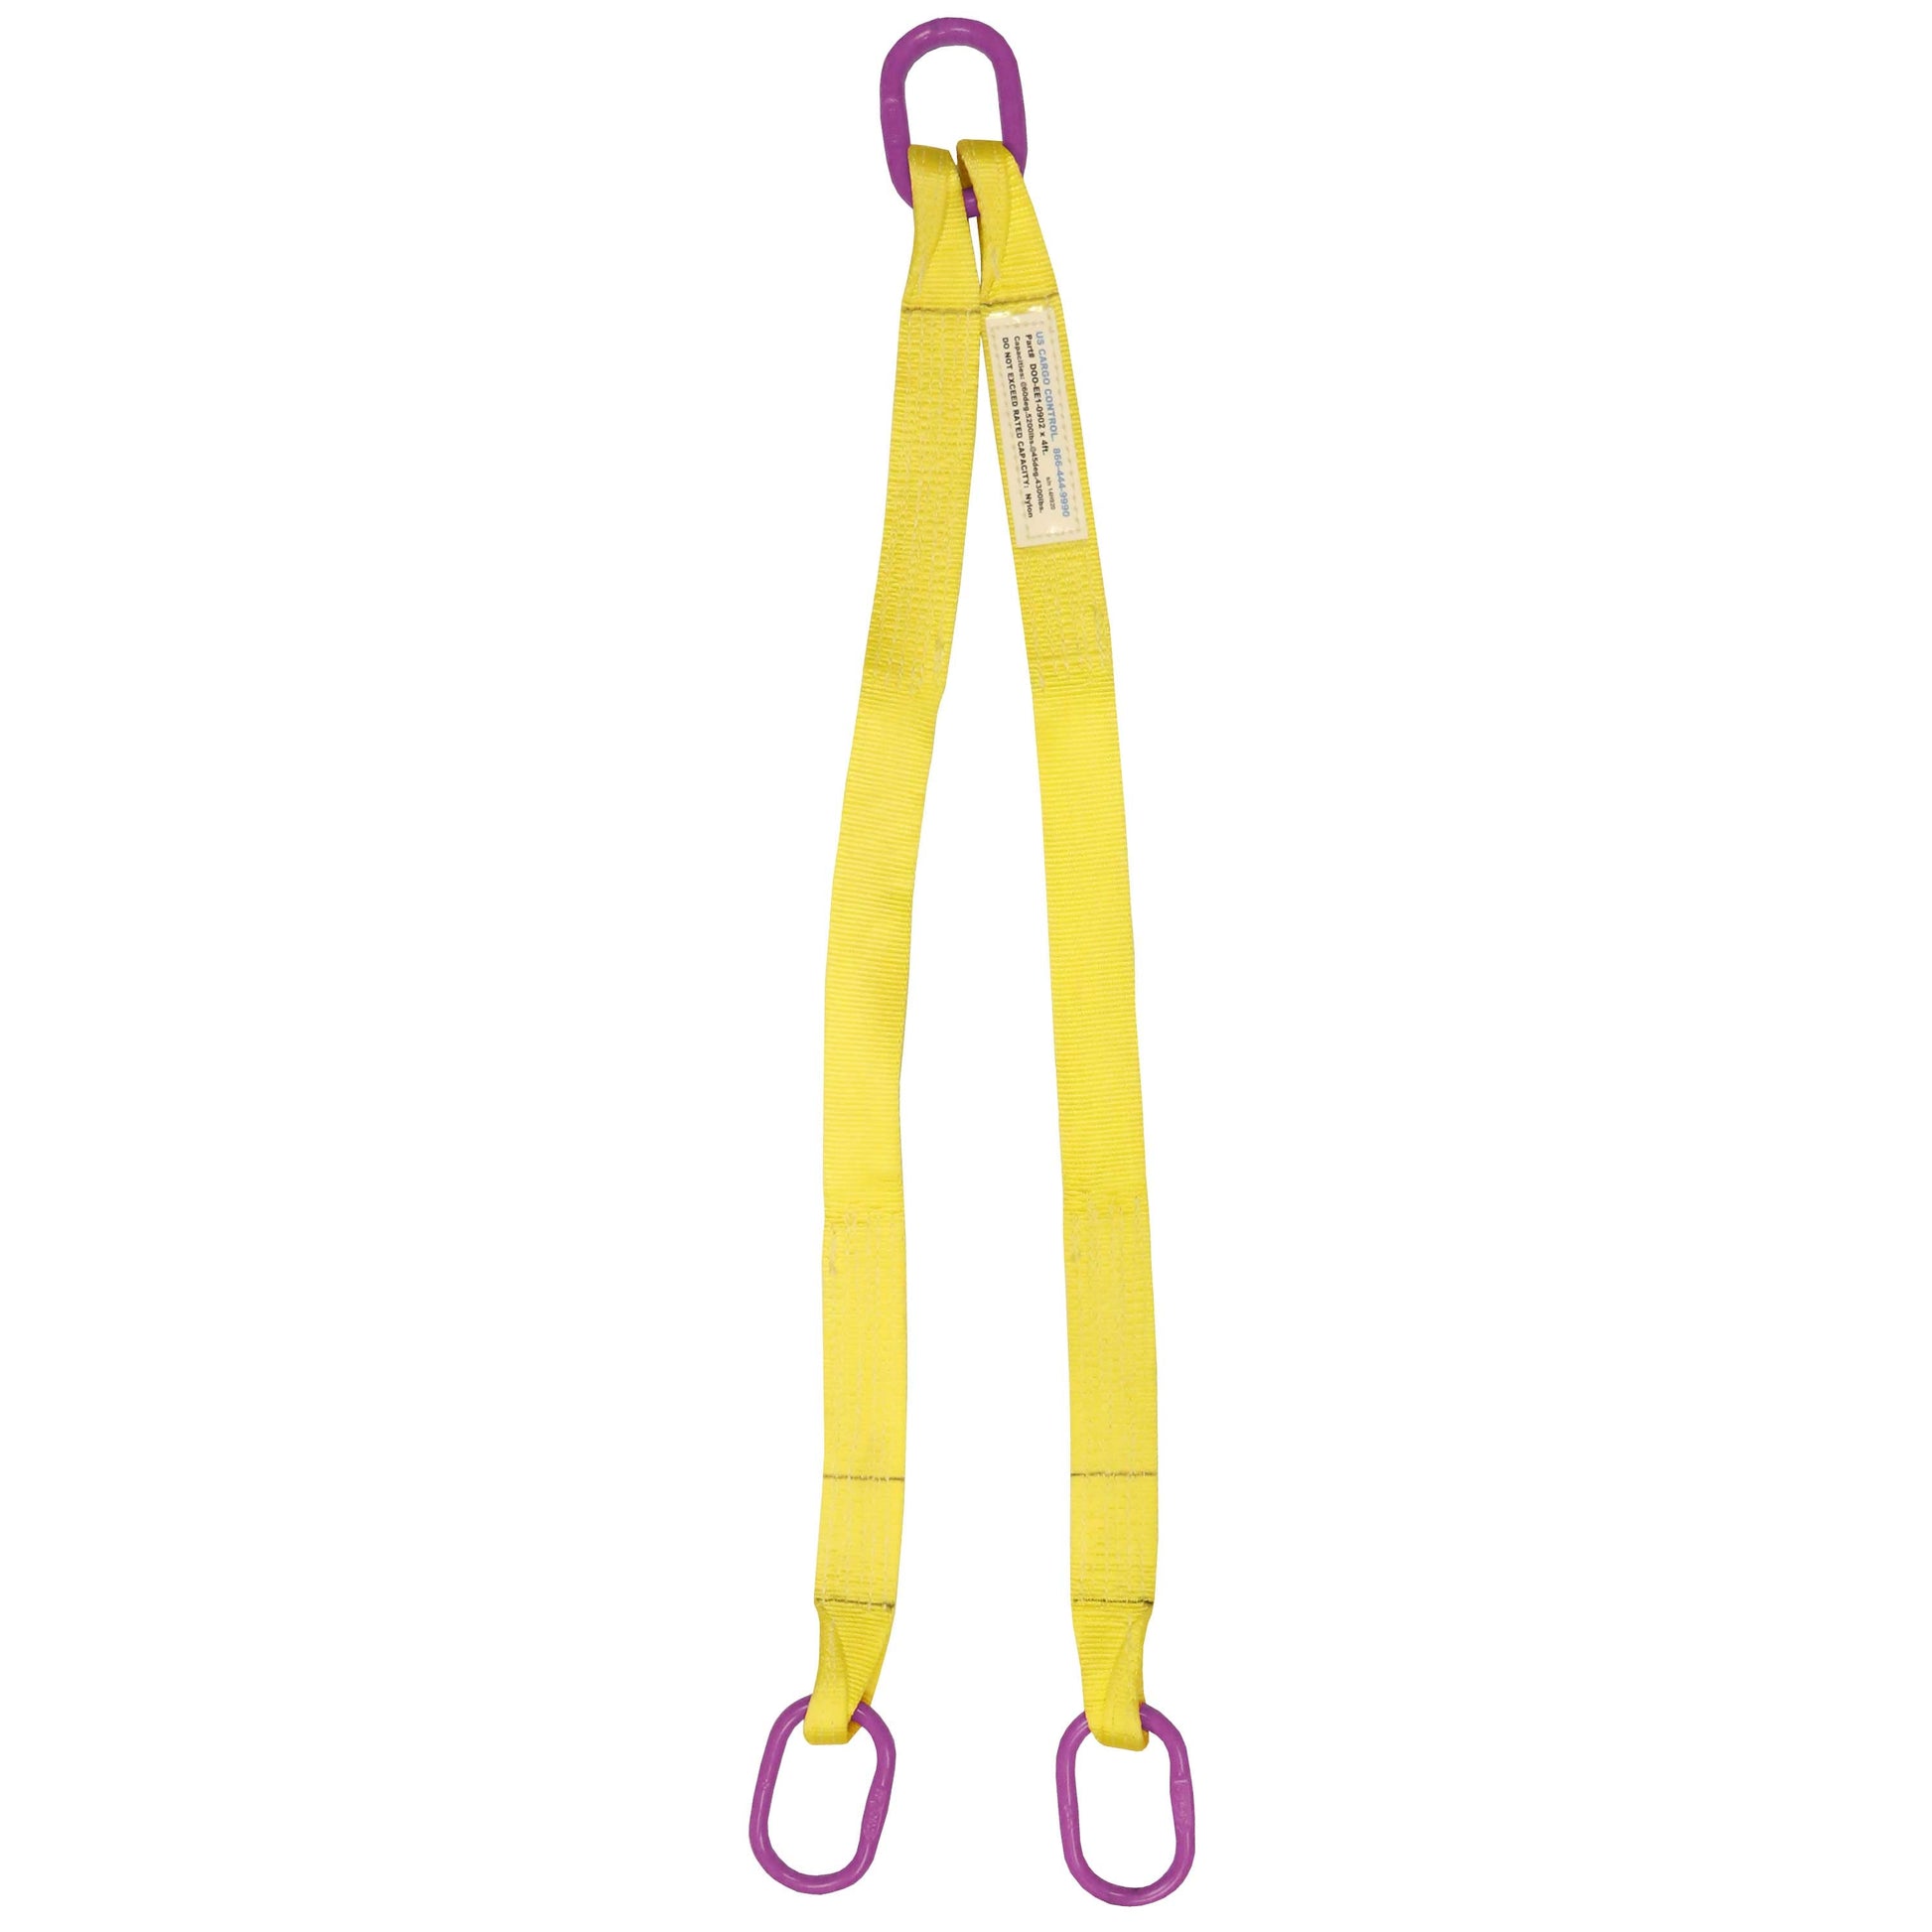 2 inchx4 foot (2 ply) Double Leg Nylon Sling w Master Link Both Ends image